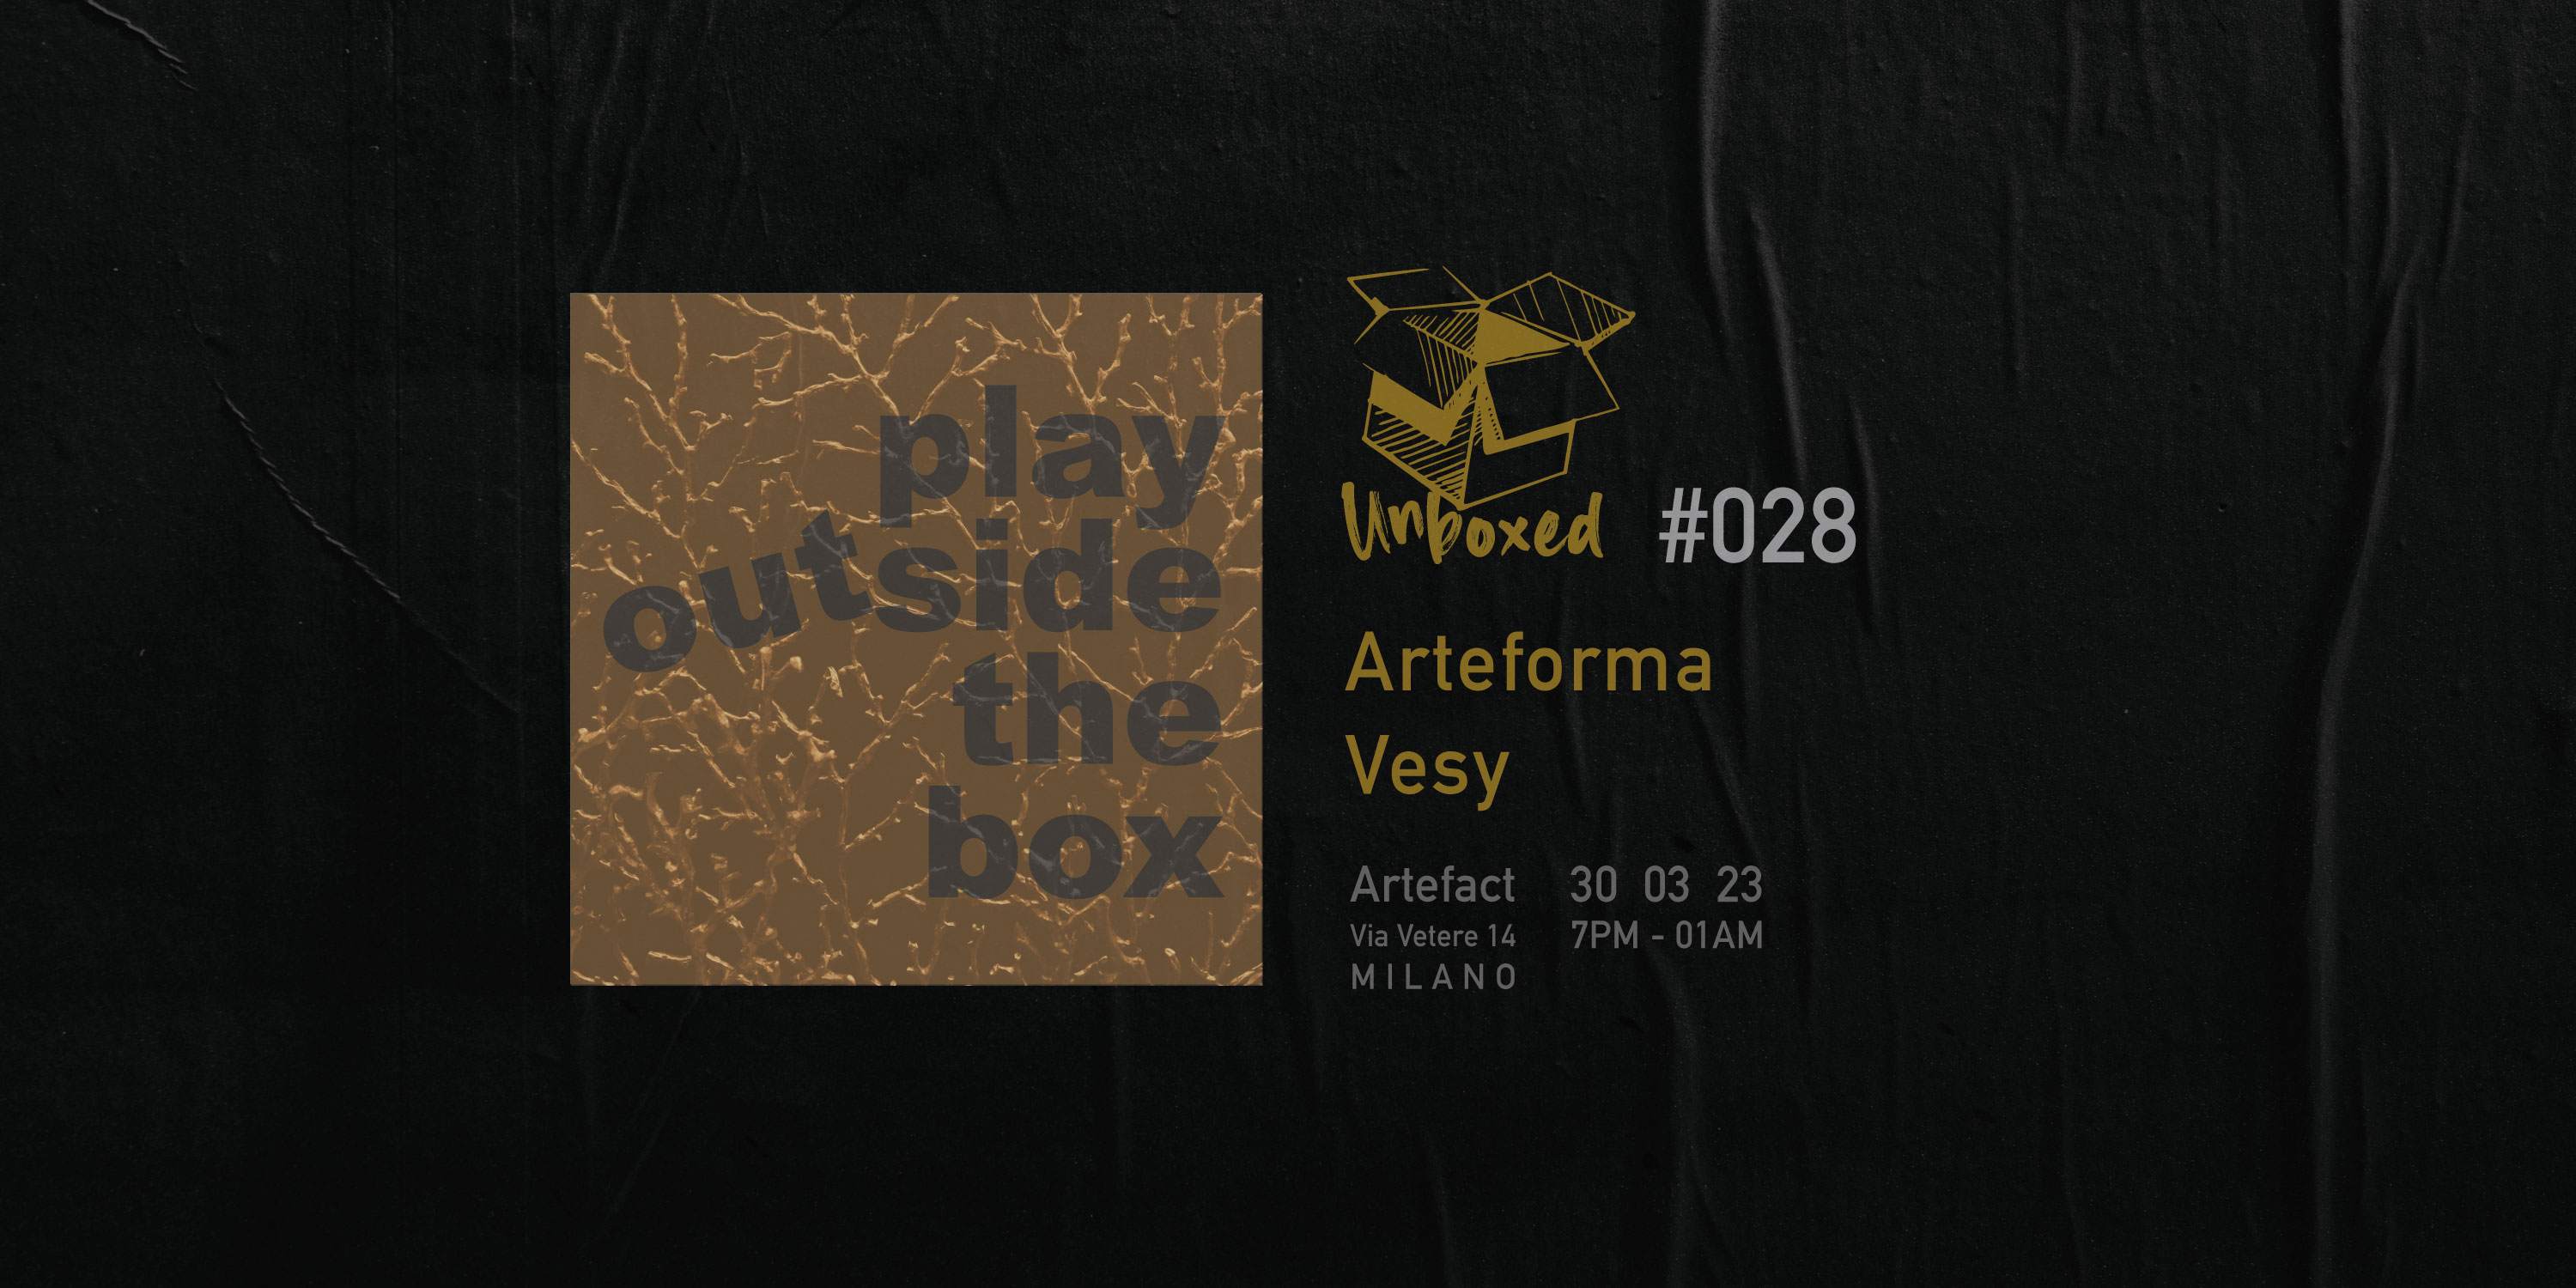 Unboxed: play outside the box #028 - フライヤー表